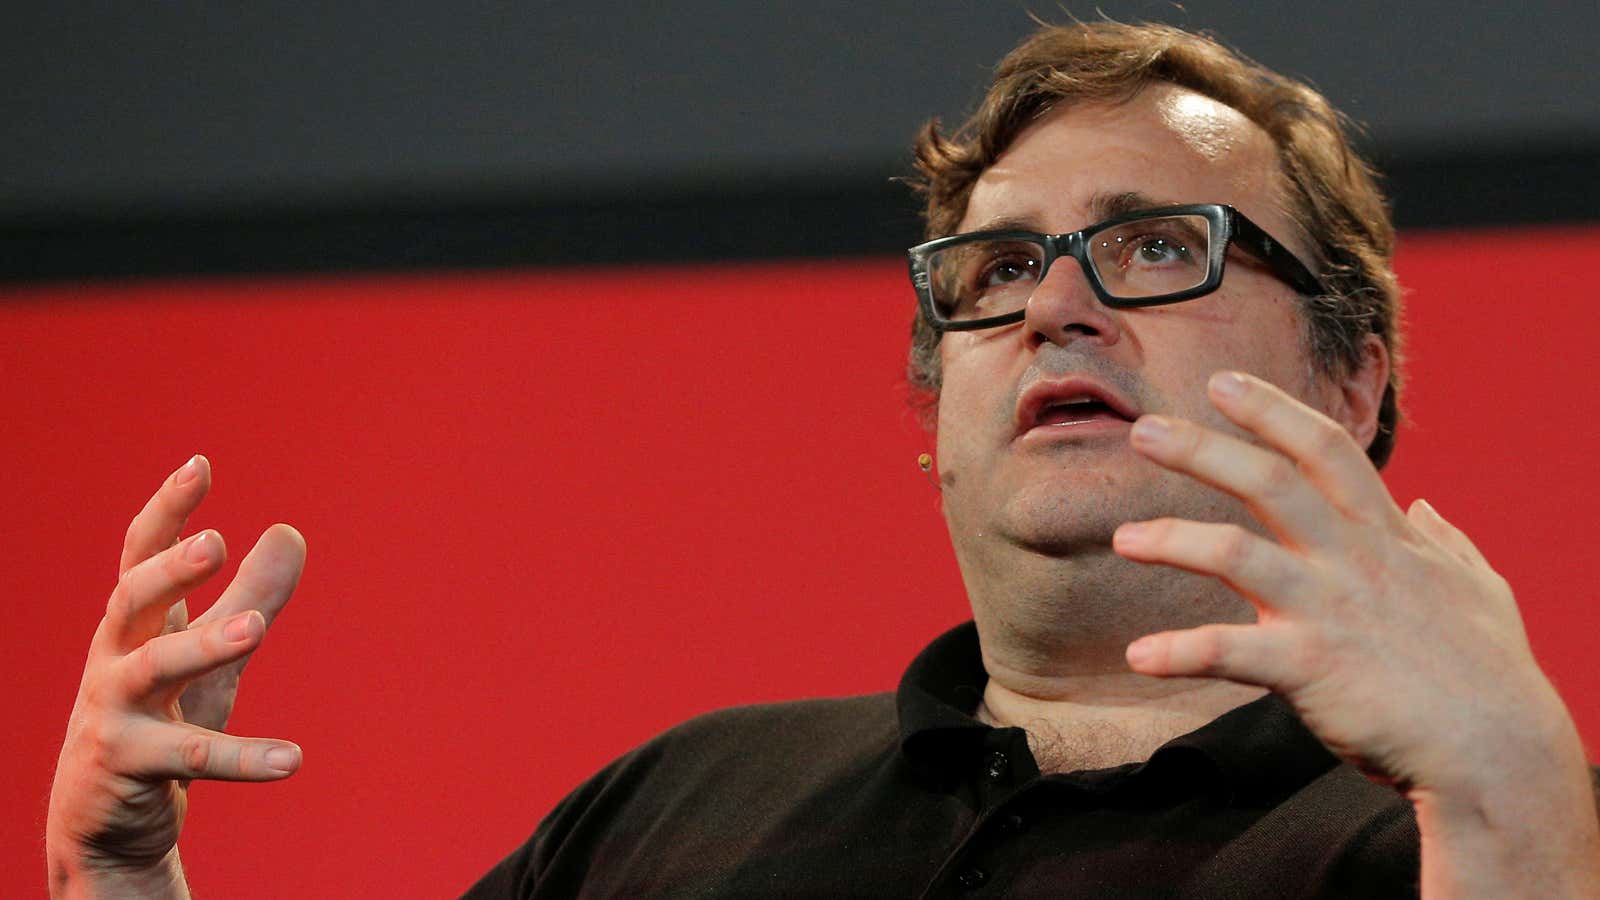 Reid Hoffman learns from the best on his “Masters of Scale” podcast.